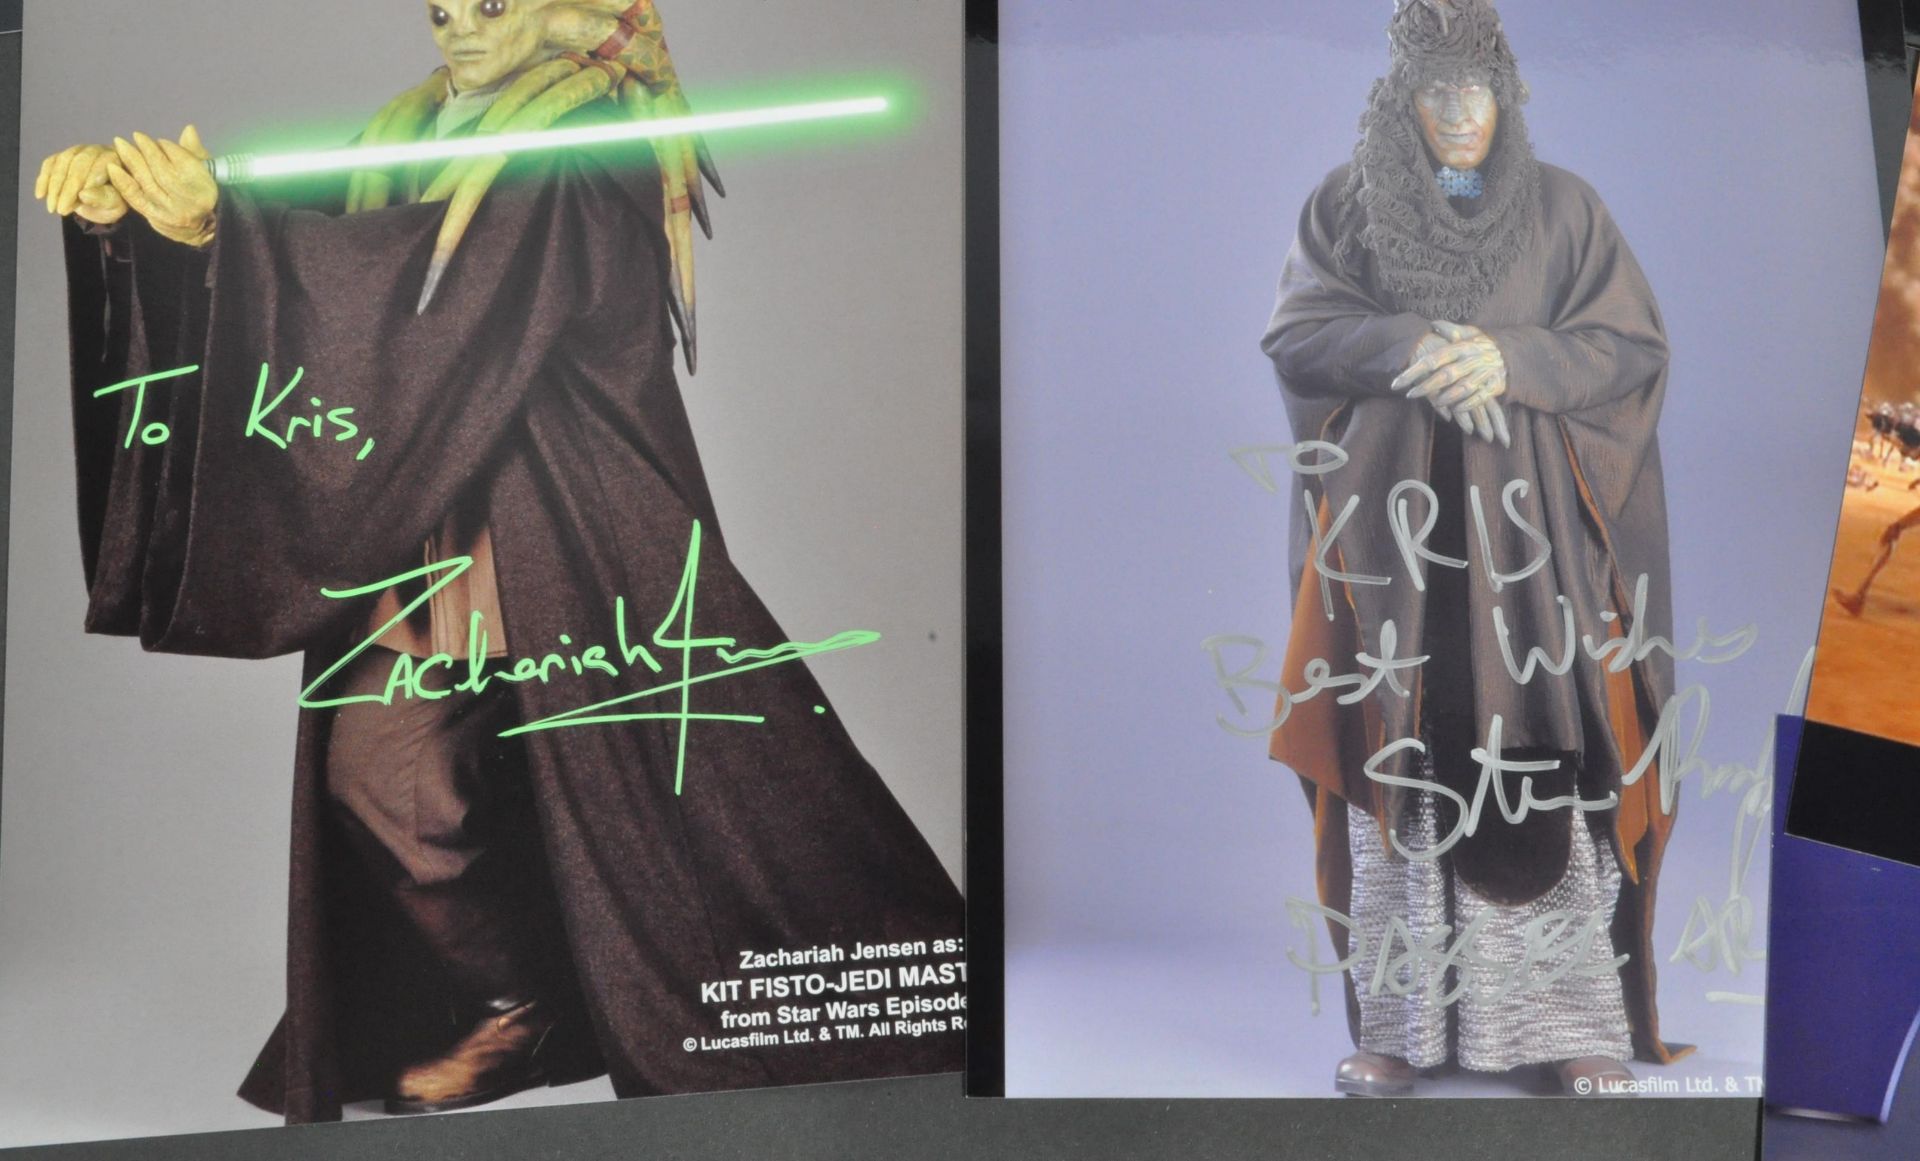 STAR WARS - ATTACK OF THE CLONES - AUTOGRAPH COLLECTION - Image 3 of 4